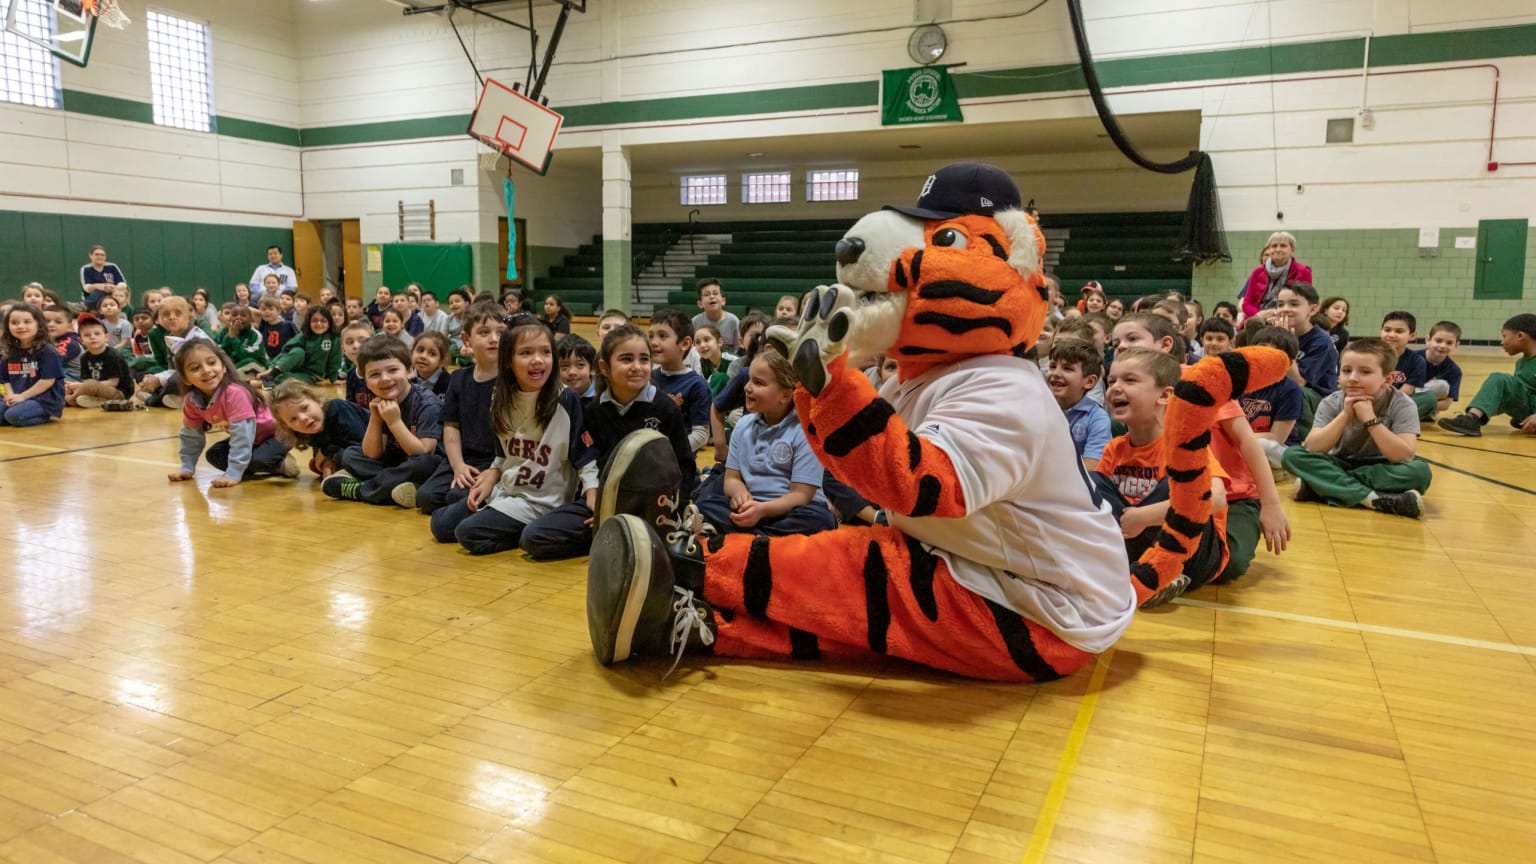 What's PAWS up to?, It's #NationalMascotDay, so we're checking in on the  best mascot around: PAWS, By Detroit Tigers